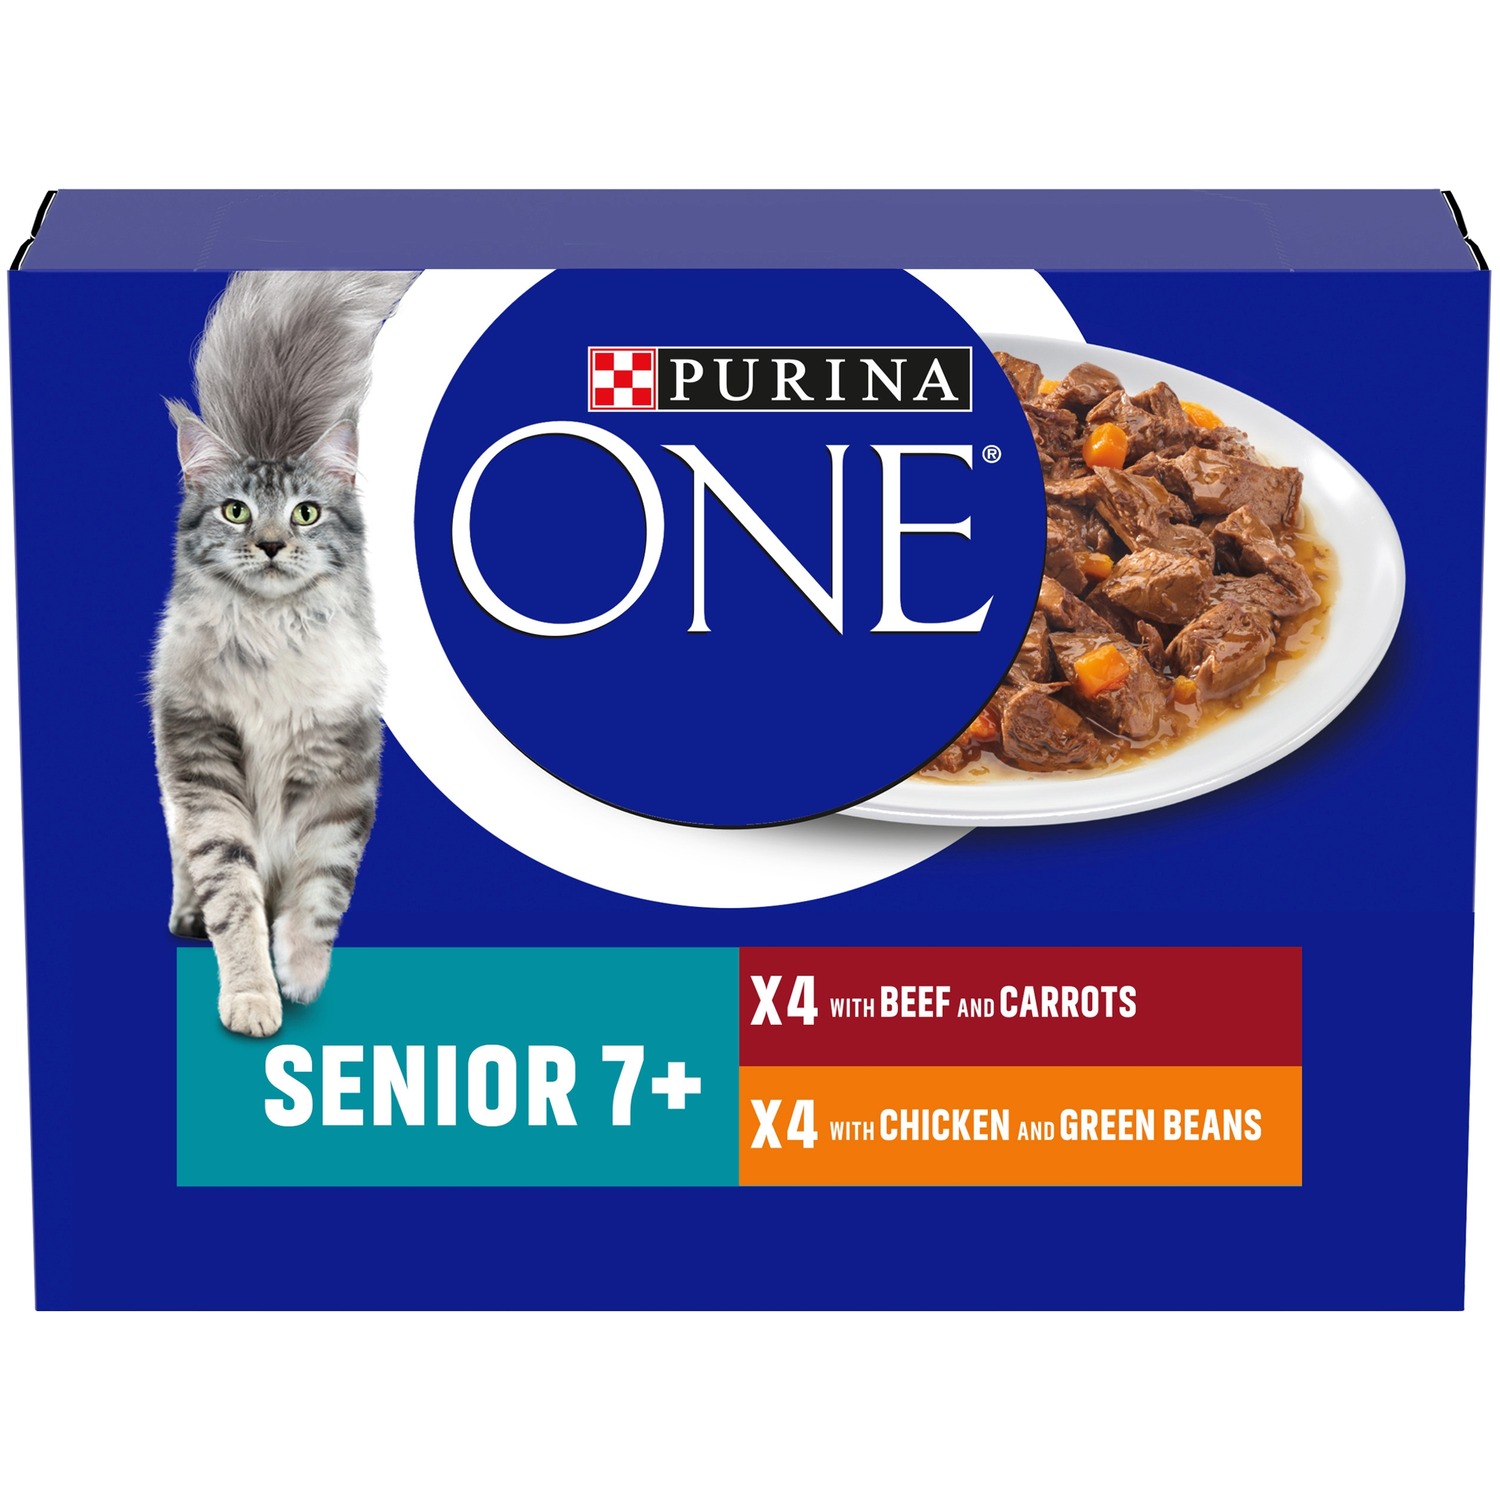 Purina One Chicken and Green Been Beef and Carrot Pouch Adult Cat Food 85g 8 Pack Image 1